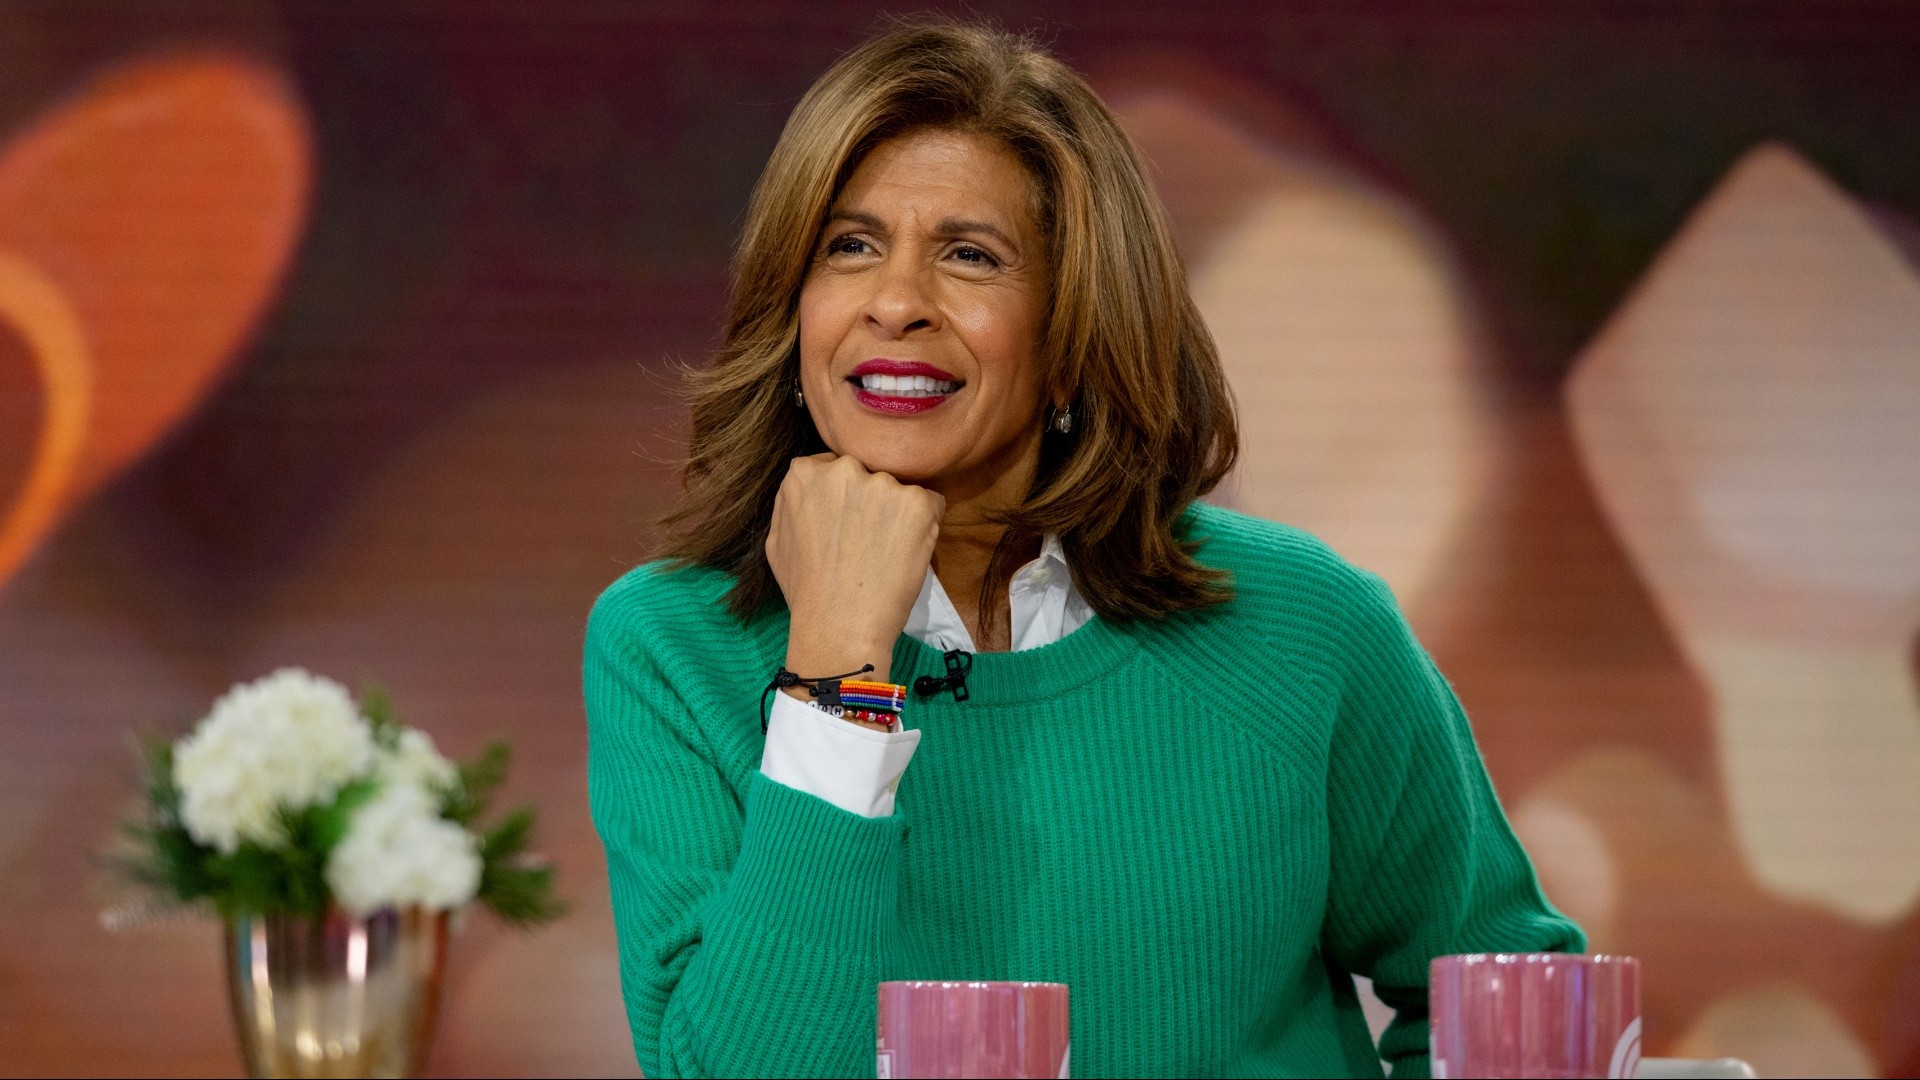 Hoda Kotb on becoming a mom later in life: I don't feel any shame